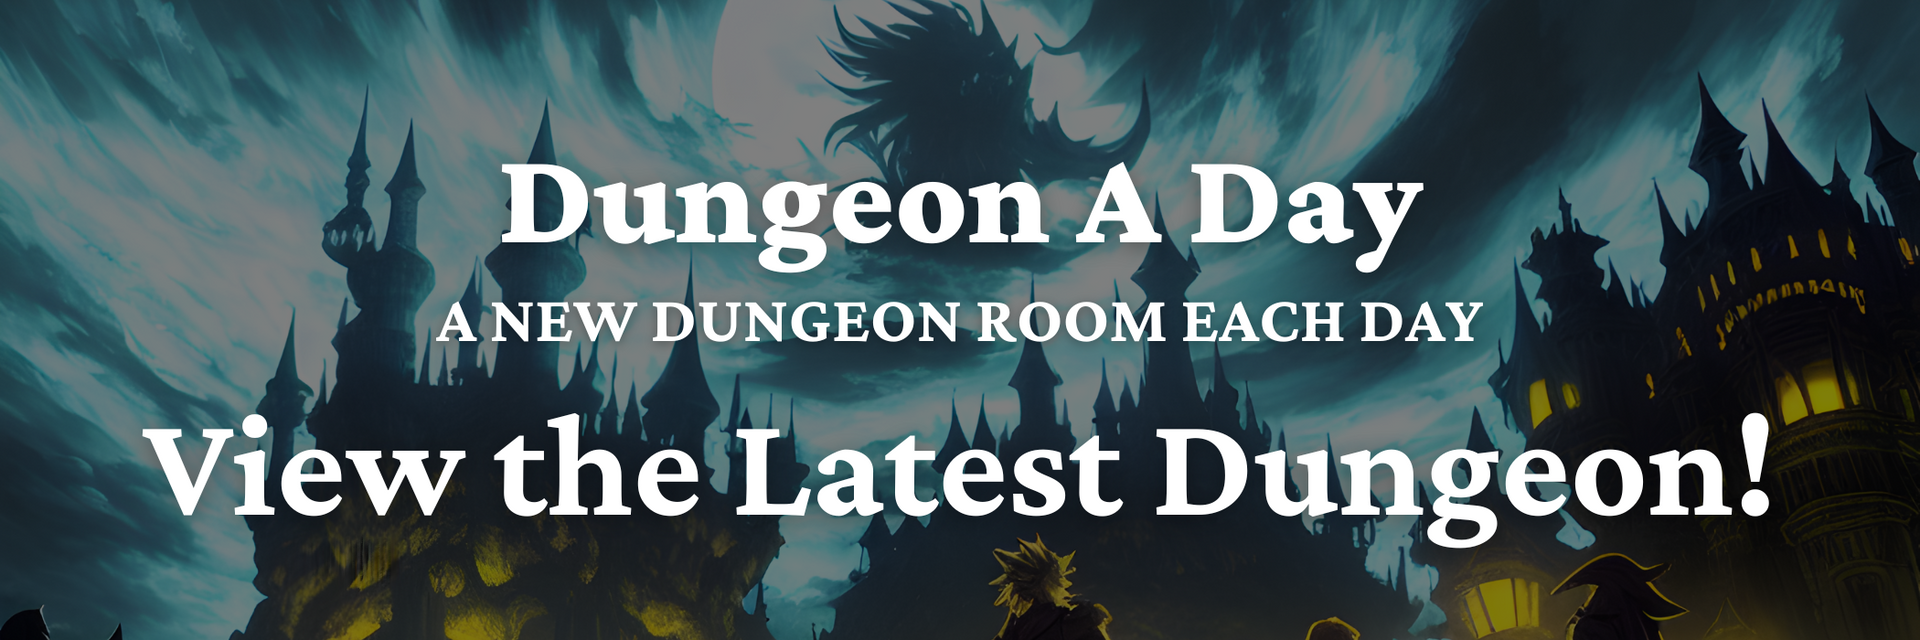 Dungeon A Day Article